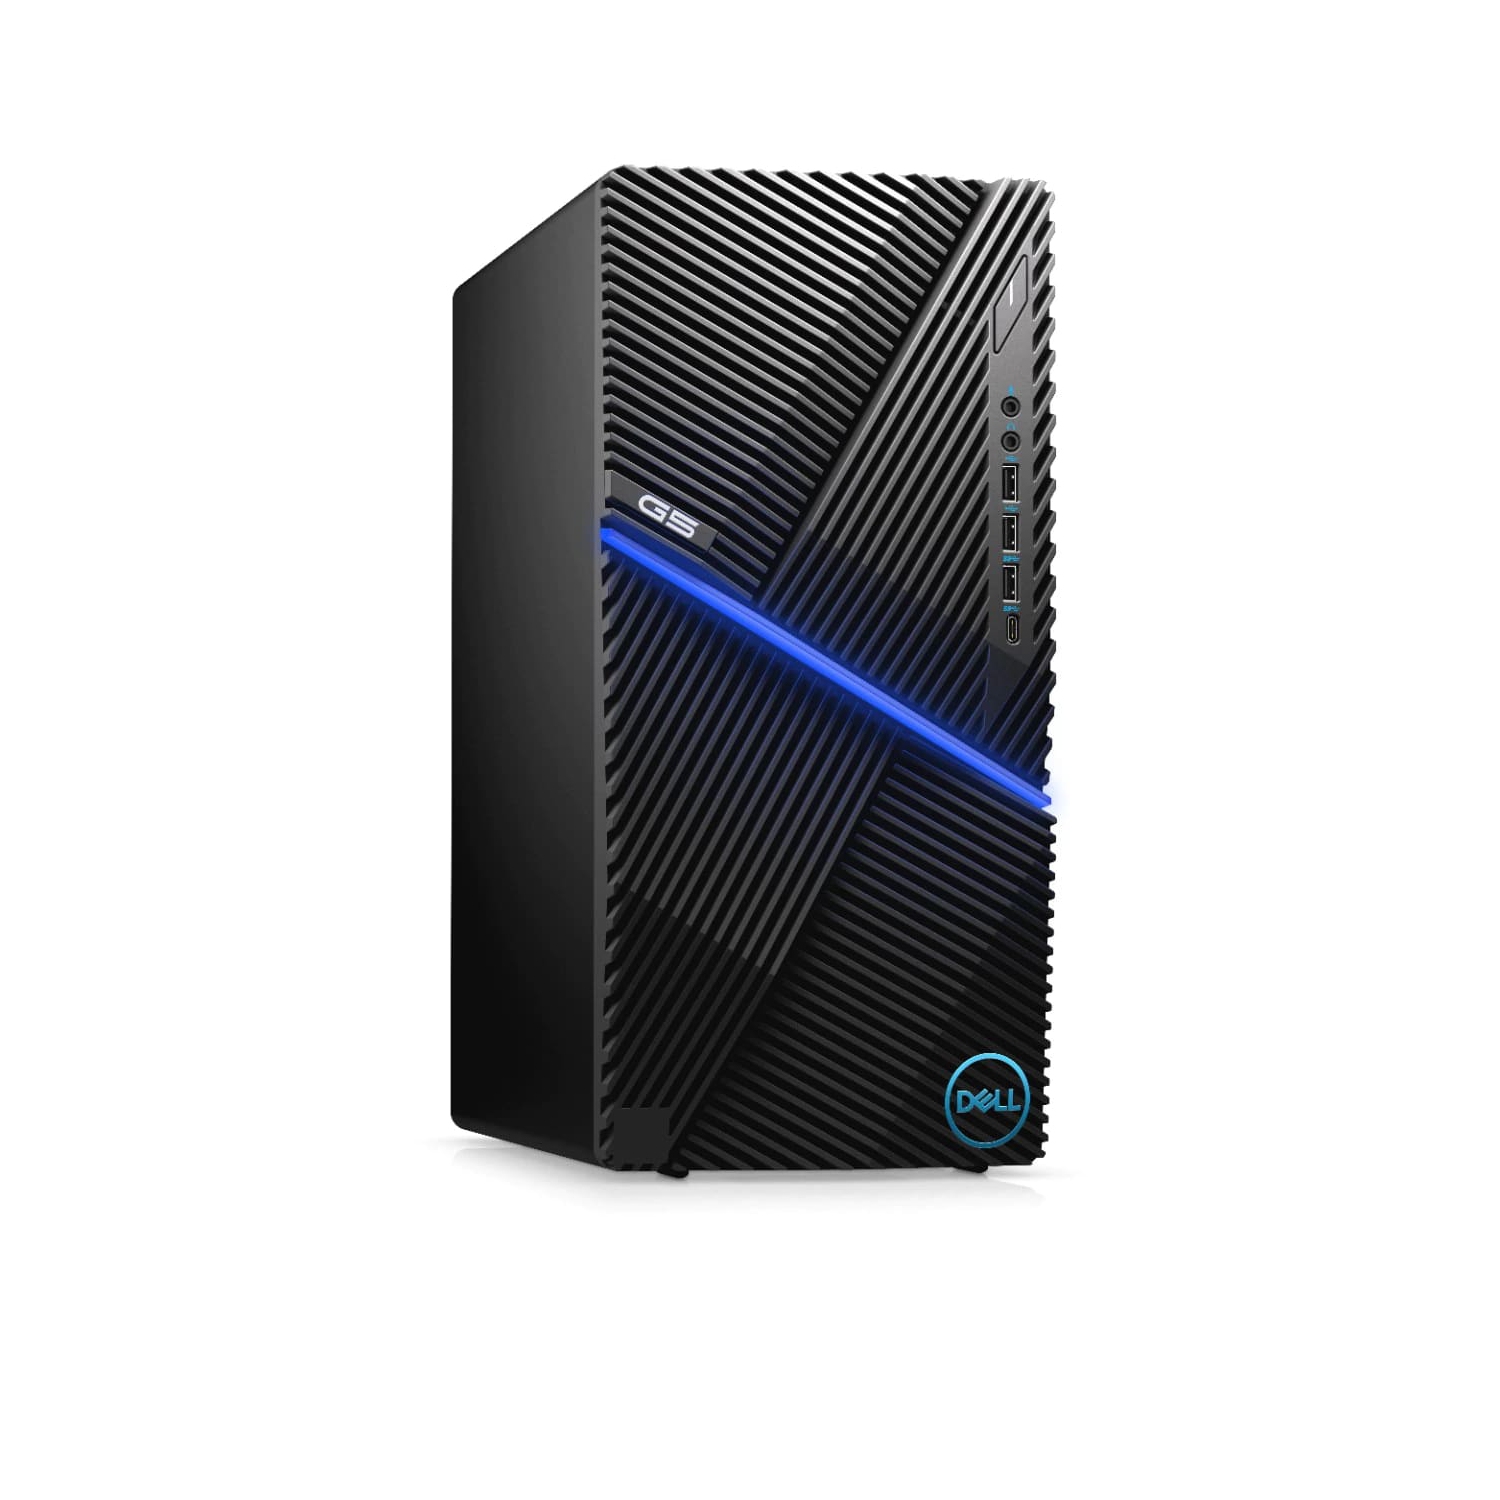 Refurbished (Excellent) - Dell G5 5000 Gaming Desktop (2020), Core i7 - 1TB HDD + 512GB SSD - 16GB RAM - RTX 3060, 8 Cores @ 5.1 GHz - 10th Gen CPU Certified Refurbished